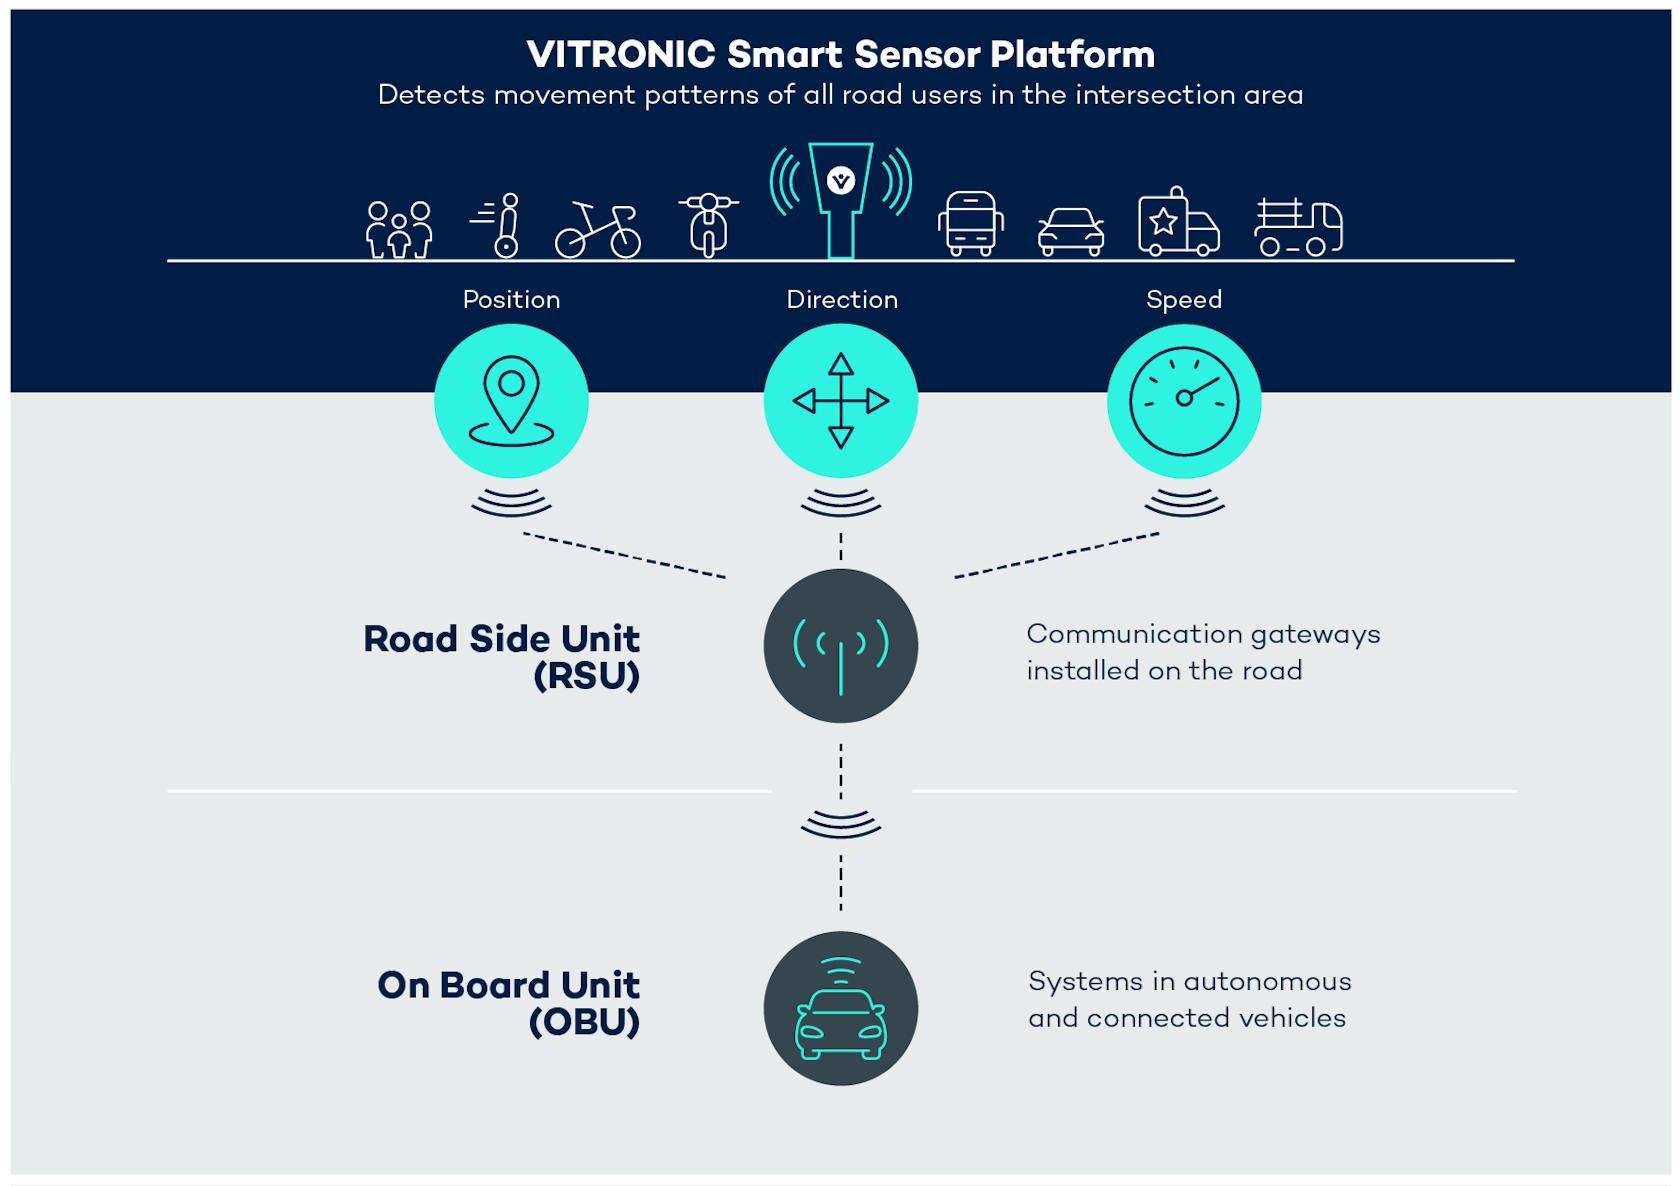 The VITRONIC Smart Sensor Platform supplies road user movement data to automated vehicles via a road side unit in order to prevent potential collisions.